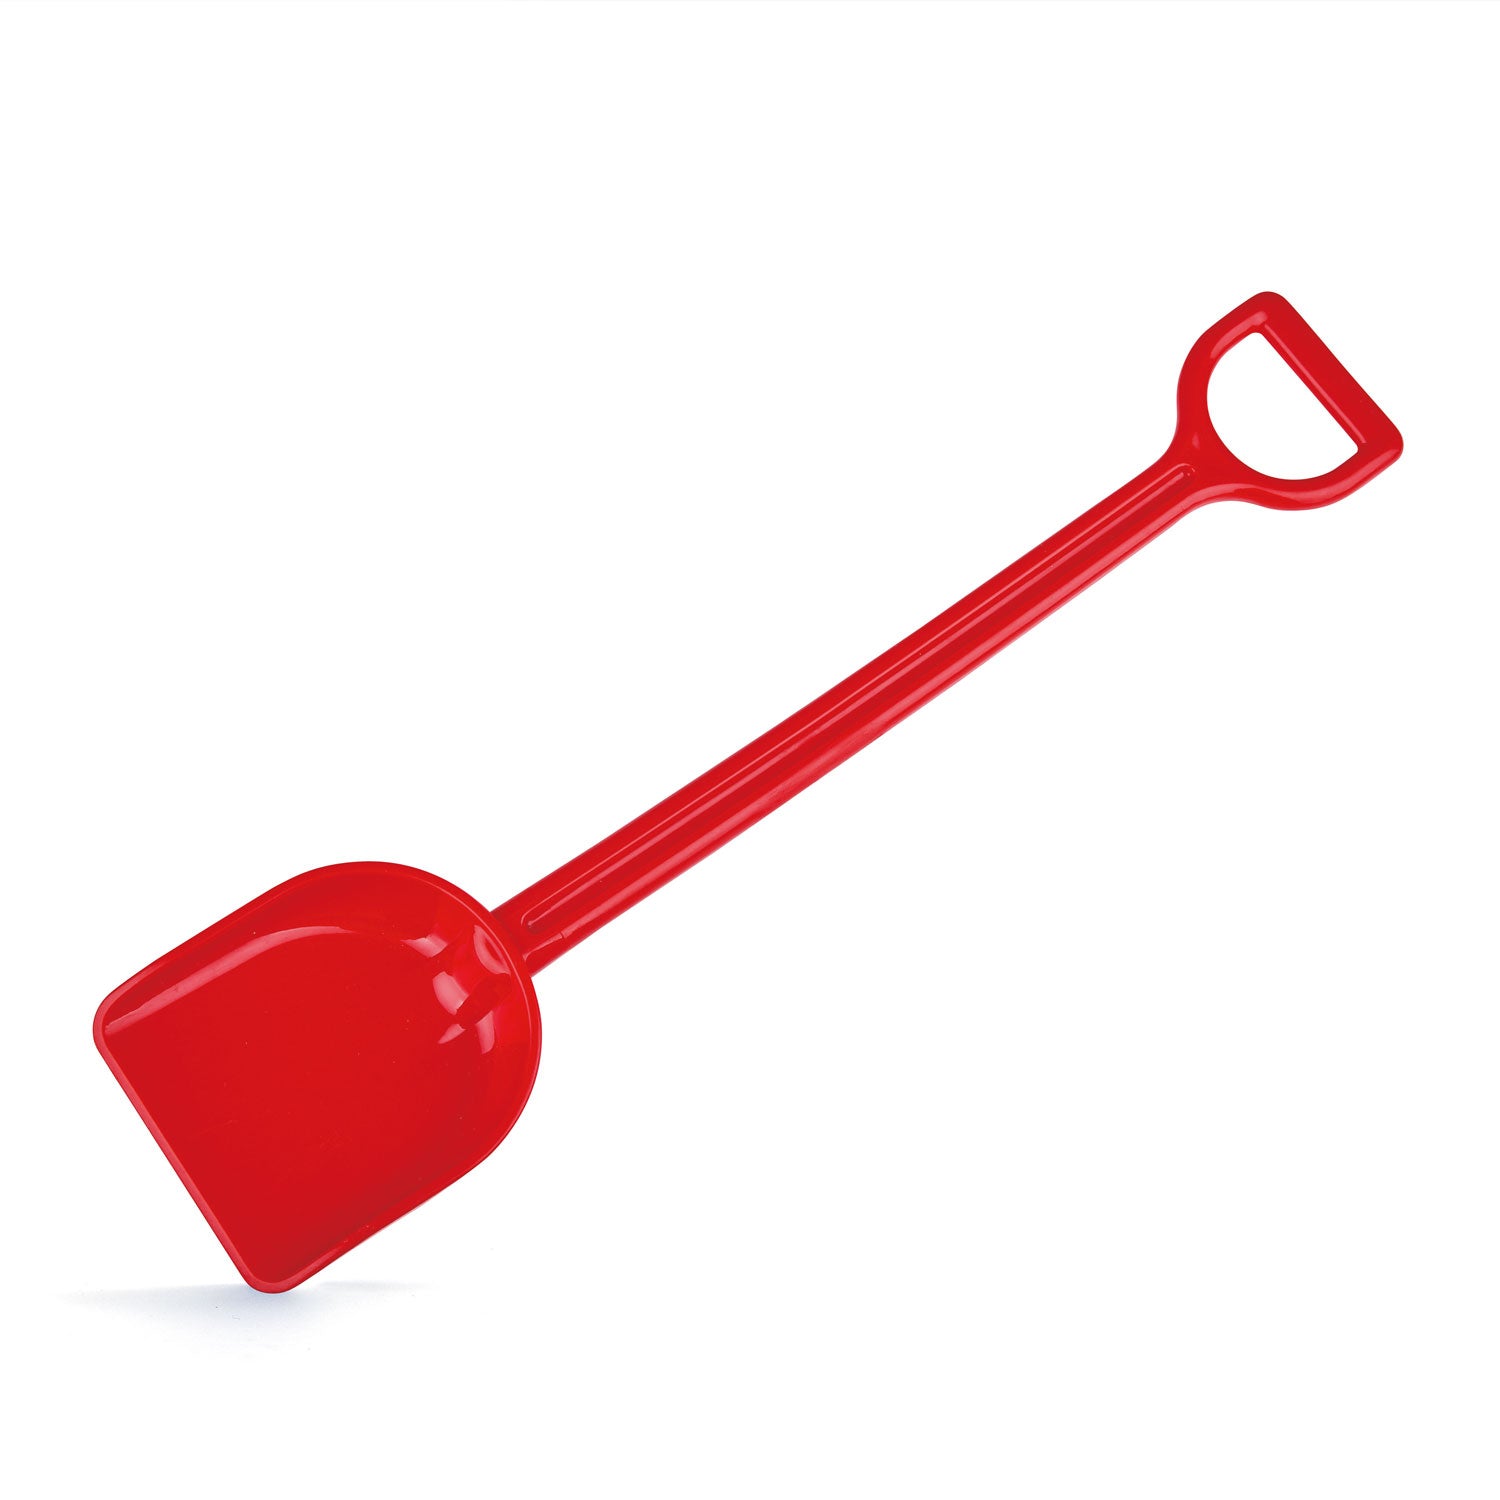 Hape Mighty Shovel - Red perfect for the sand or backyard play with quality outdoor toys The Toy Wagon